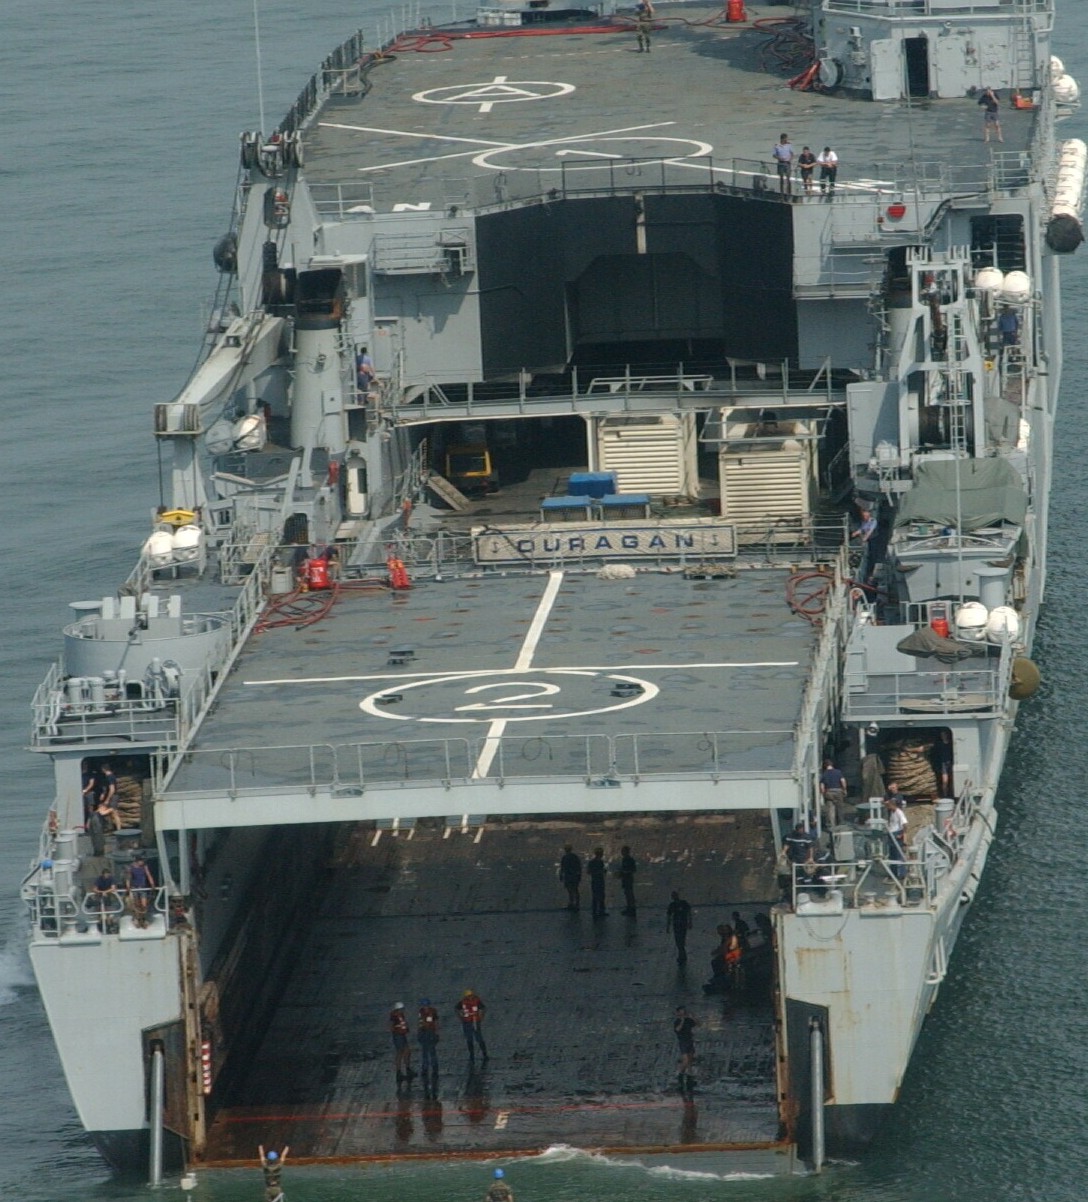 l-9021 ouragan amphibious dock landing ship lpd tcd french navy marine nationale 02a well deck